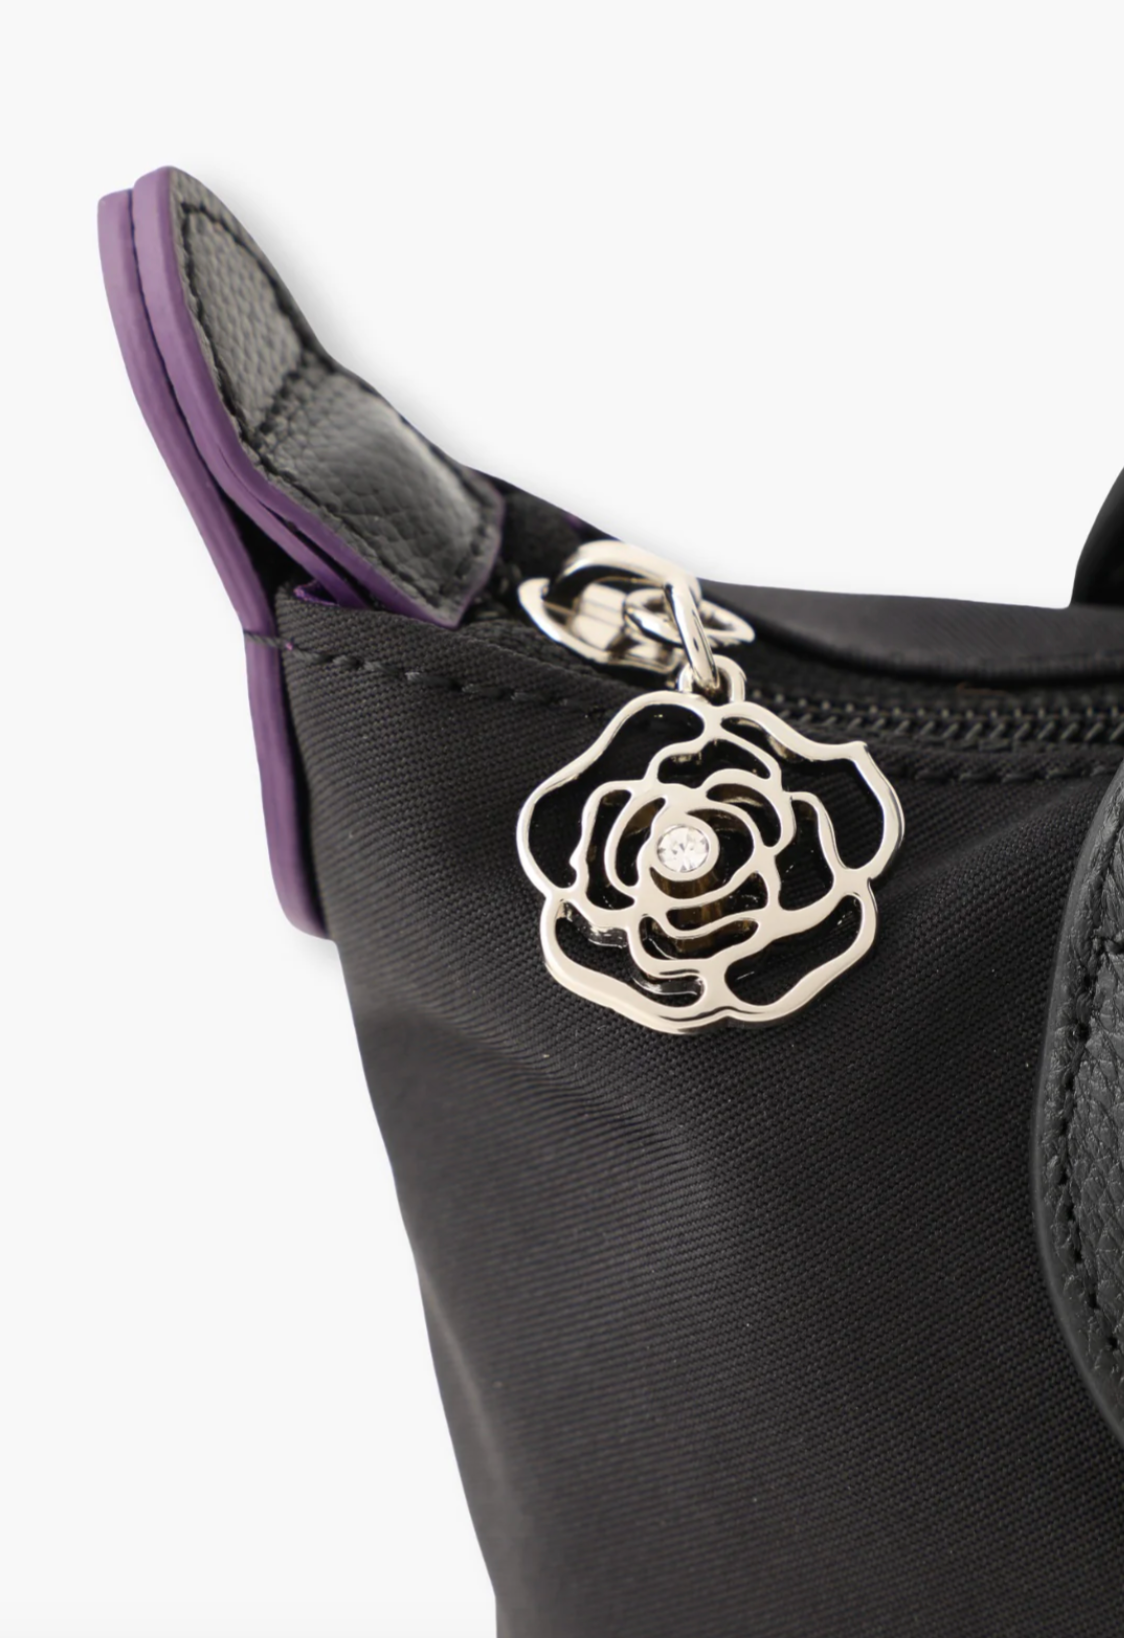 Detail of the zipper rose with a gemstone pull tab, horn with purple edges, and the black stiches 